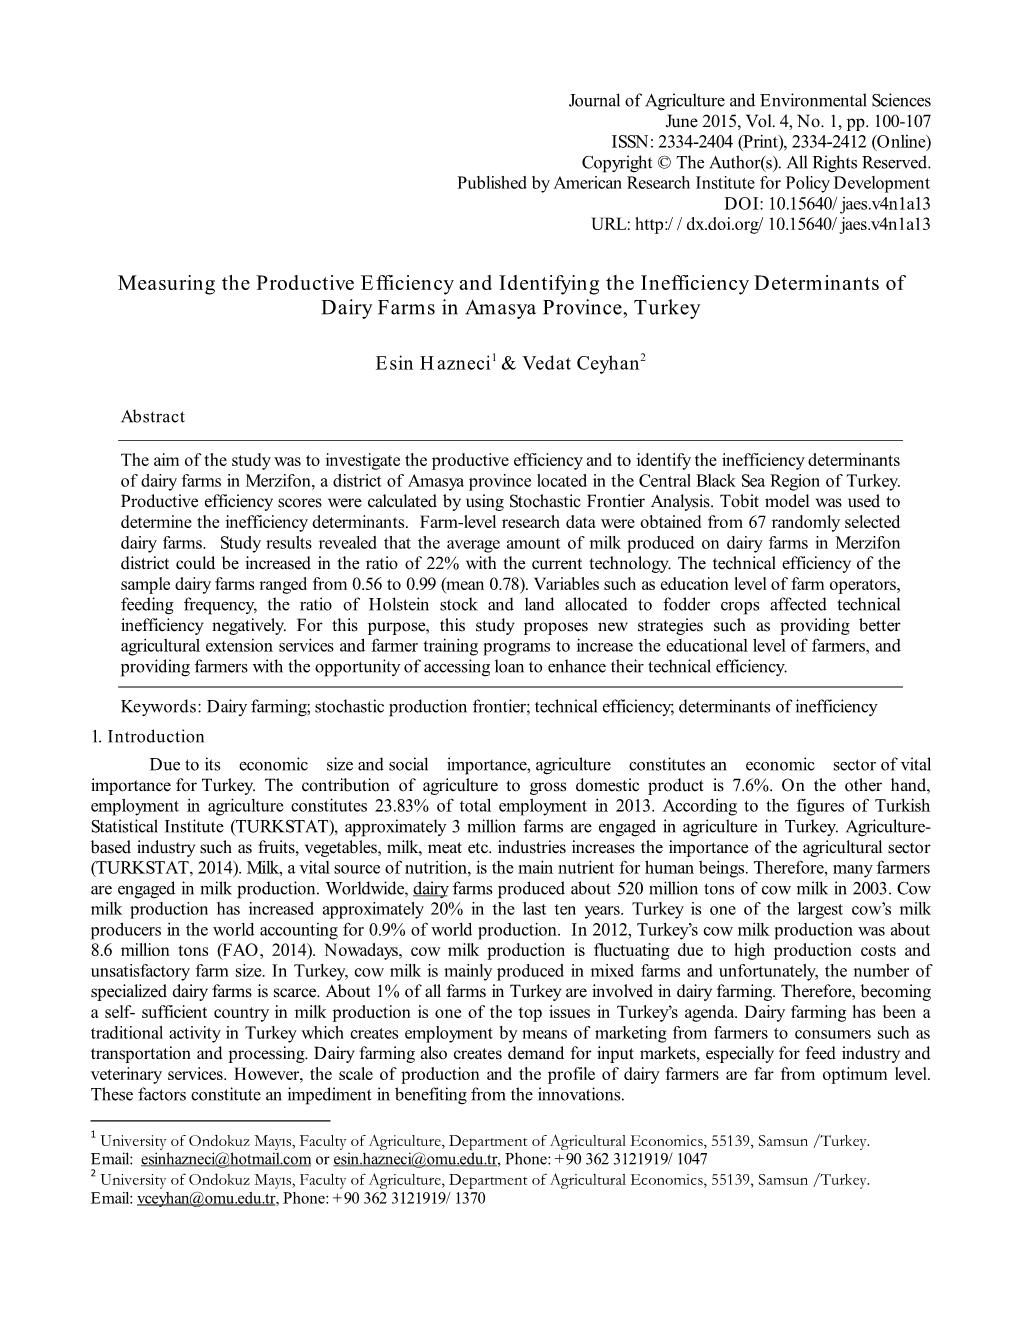 Measuring the Productive Efficiency and Identifying the Inefficiency Determinants of Dairy Farms in Amasya Province, Turkey